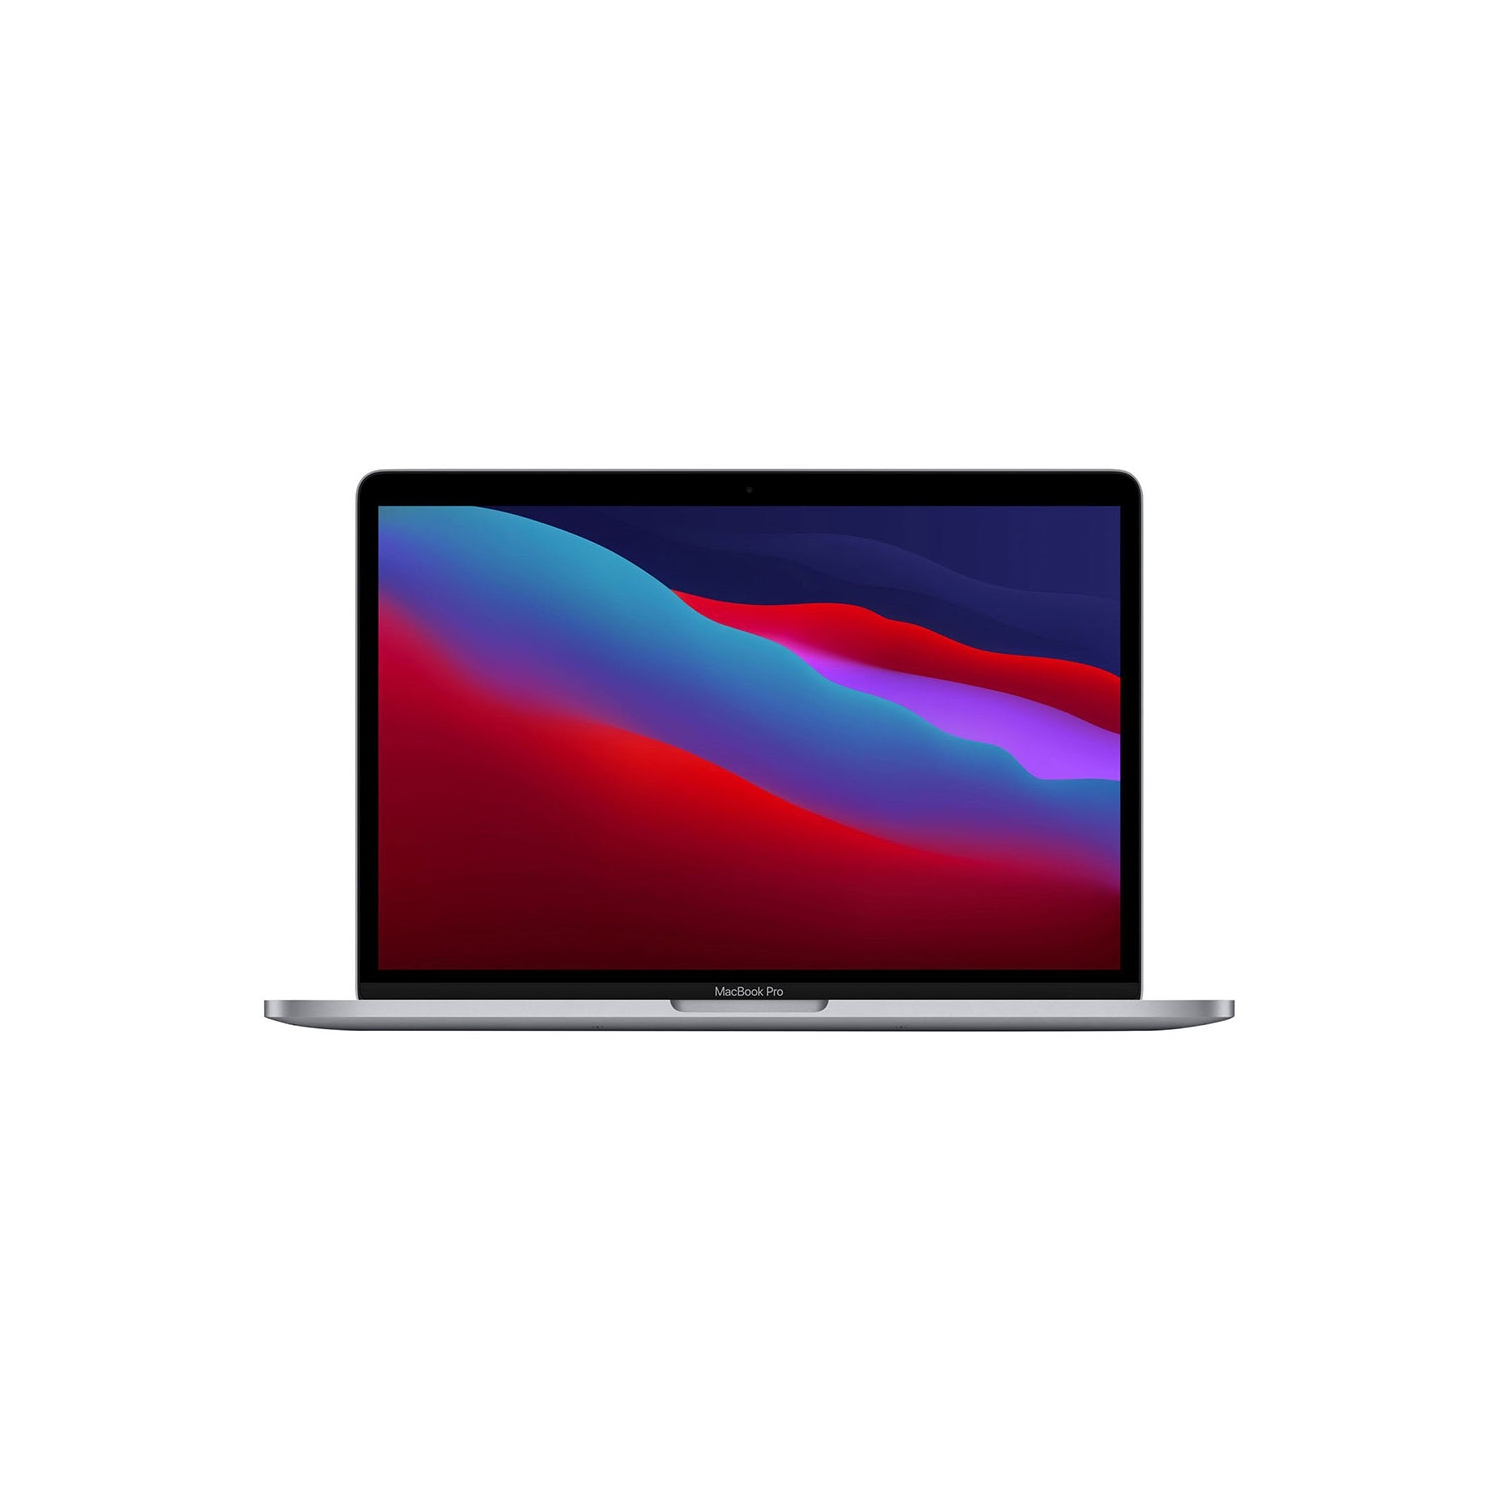 Apple MacBook Pro 13.3-inch / M1 Chip with 8-Core CPU and 8-Core GPU / 256GB / 8GB Memory / French - Open Box